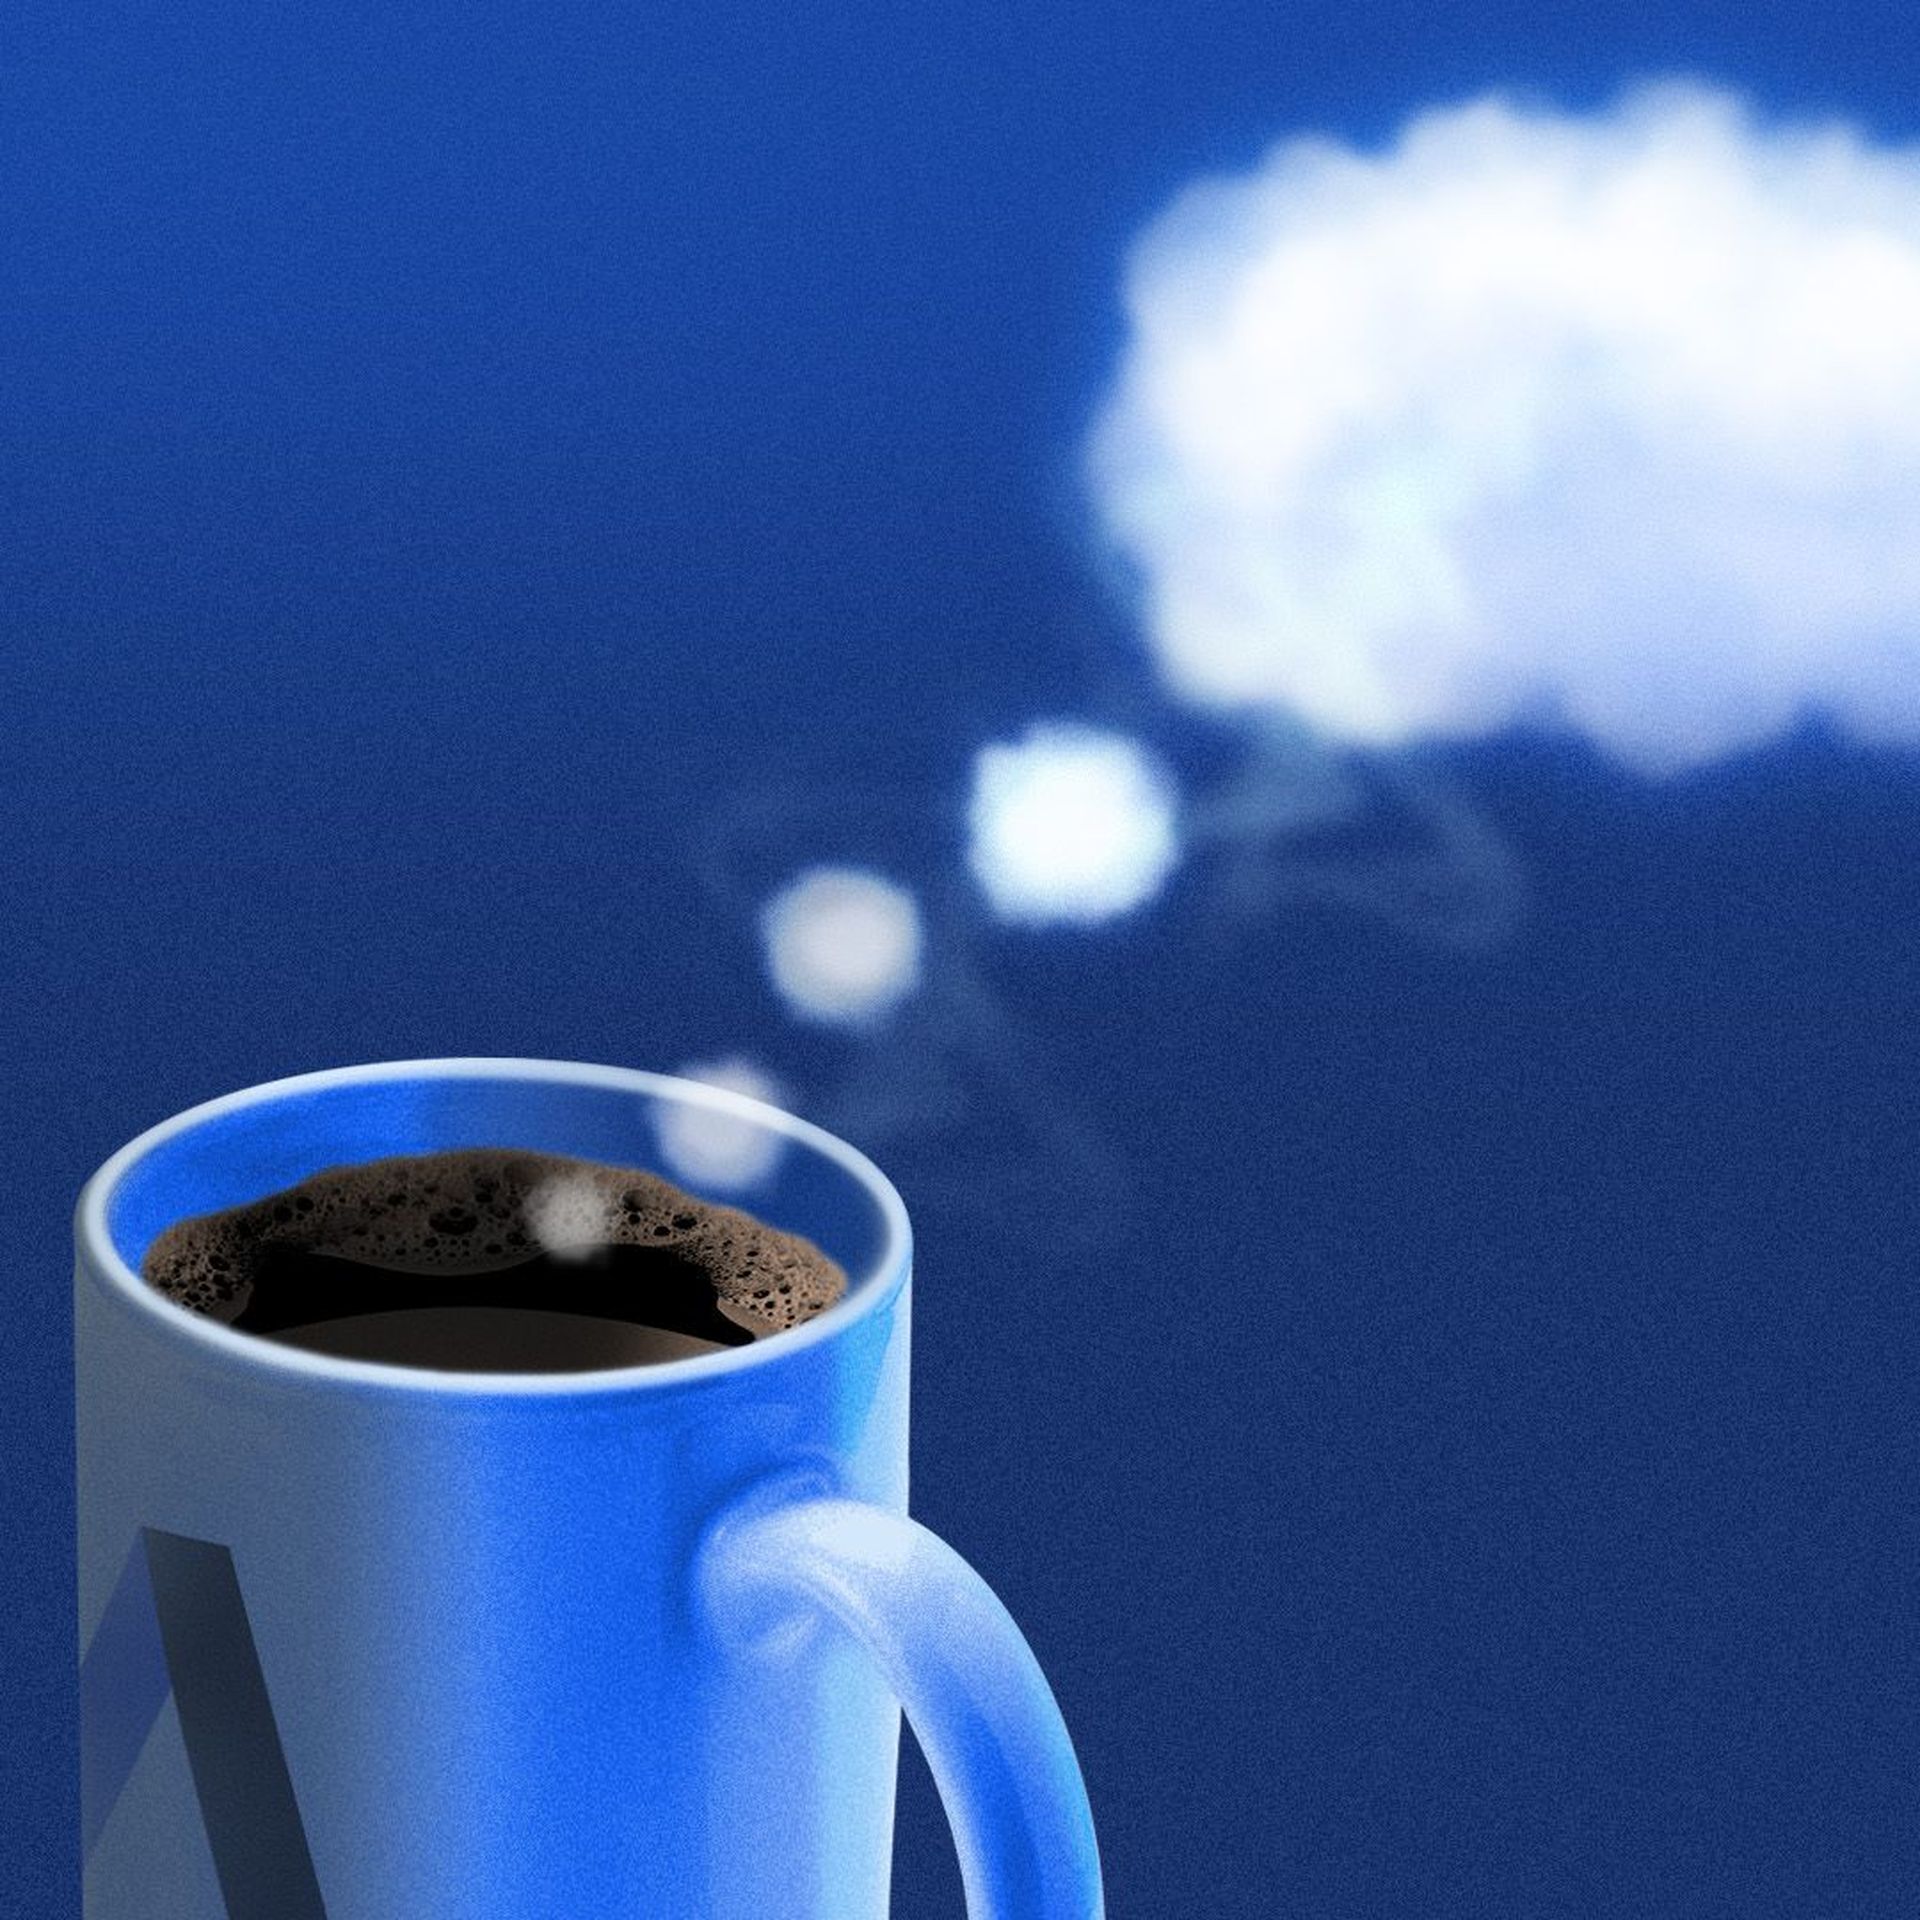 Illustration of a coffee mug with the Axios logo with steam forming a thought bubble